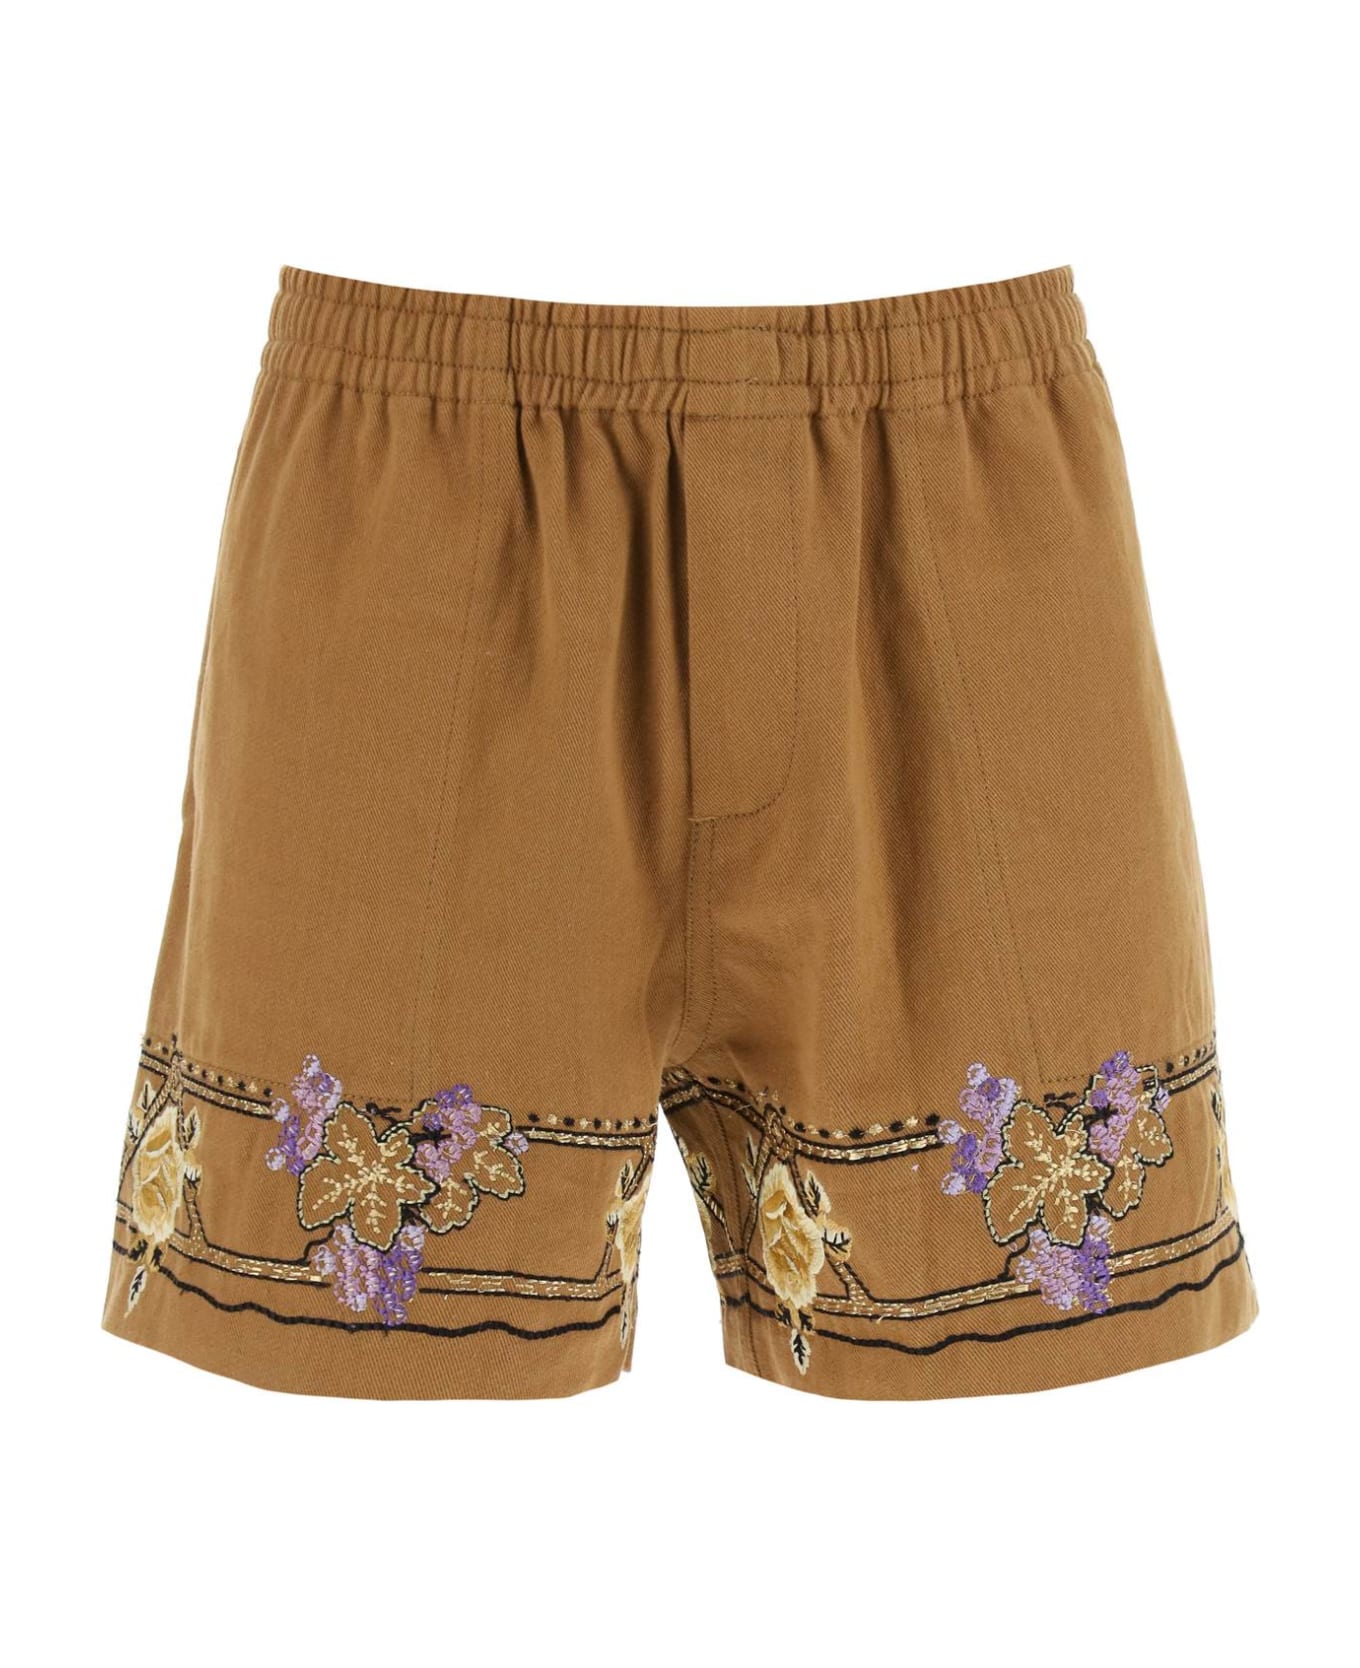 Bode Autumn Royal Shorts With Floral Embroideries - BROWN MULTI (Brown)